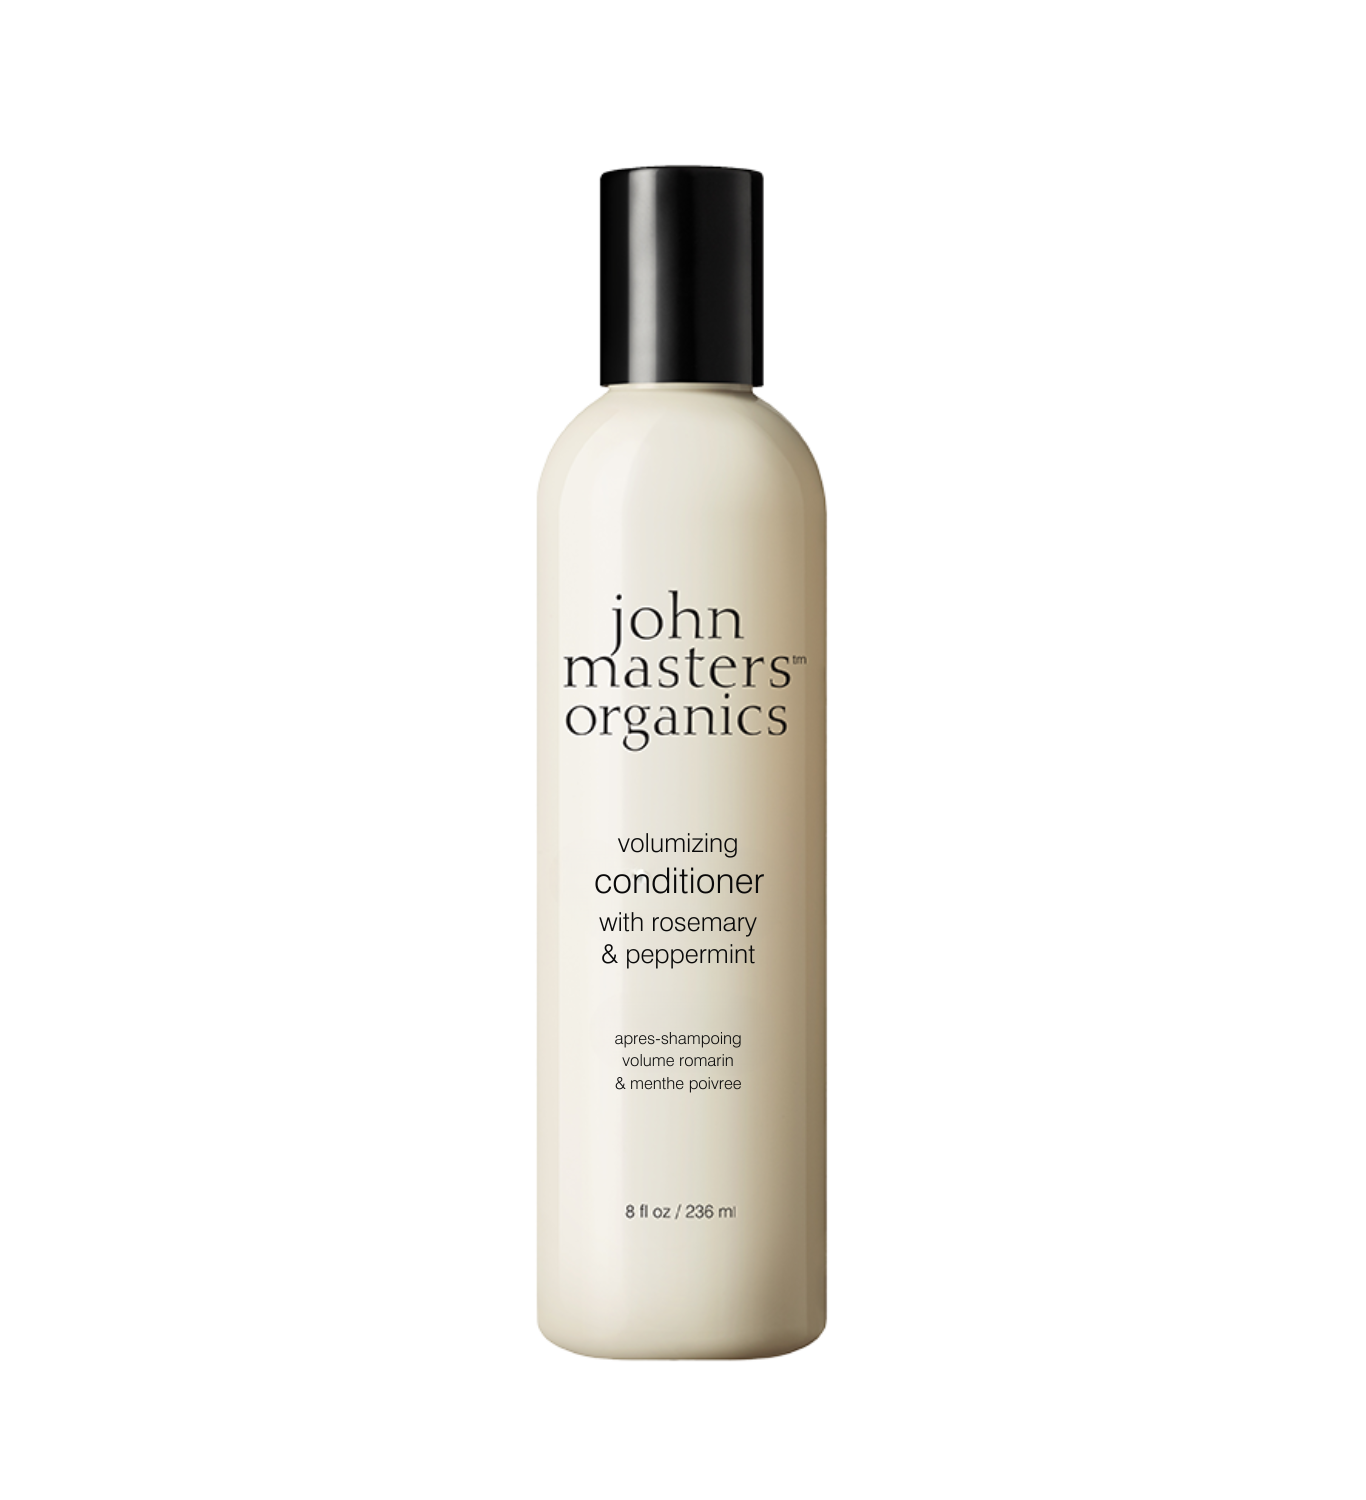 Volumizing Conditioner with Rosemary & Peppermint: 8 fl oz / 236 ml